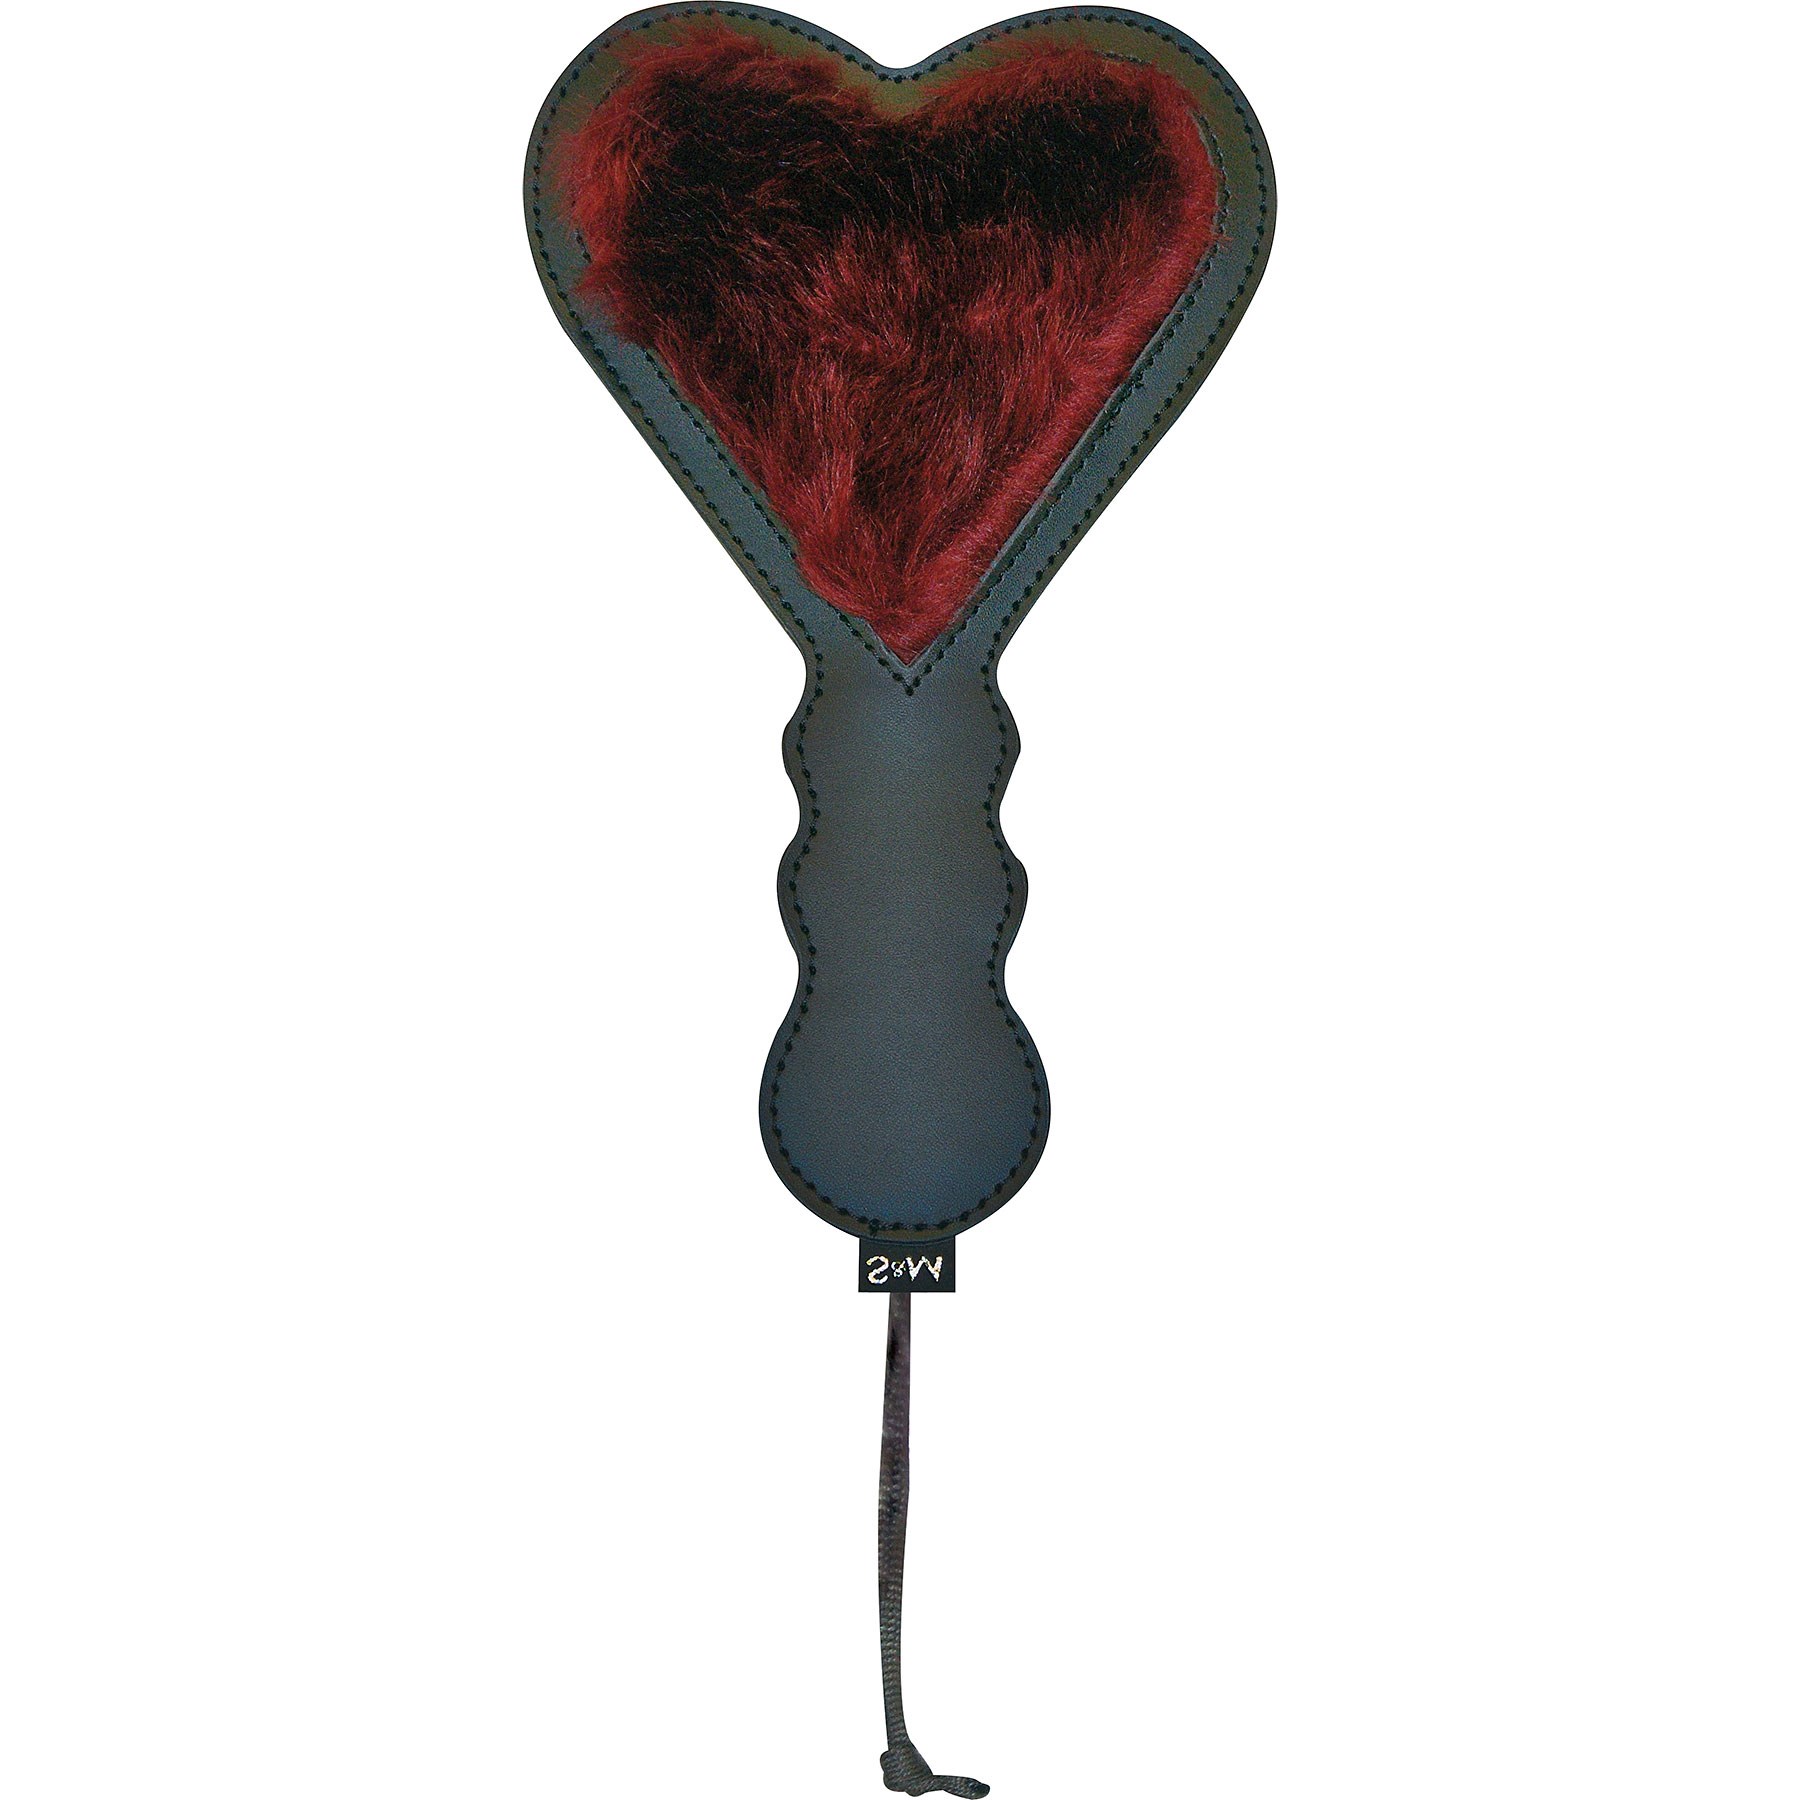 S&M Enchanted Heart Paddle